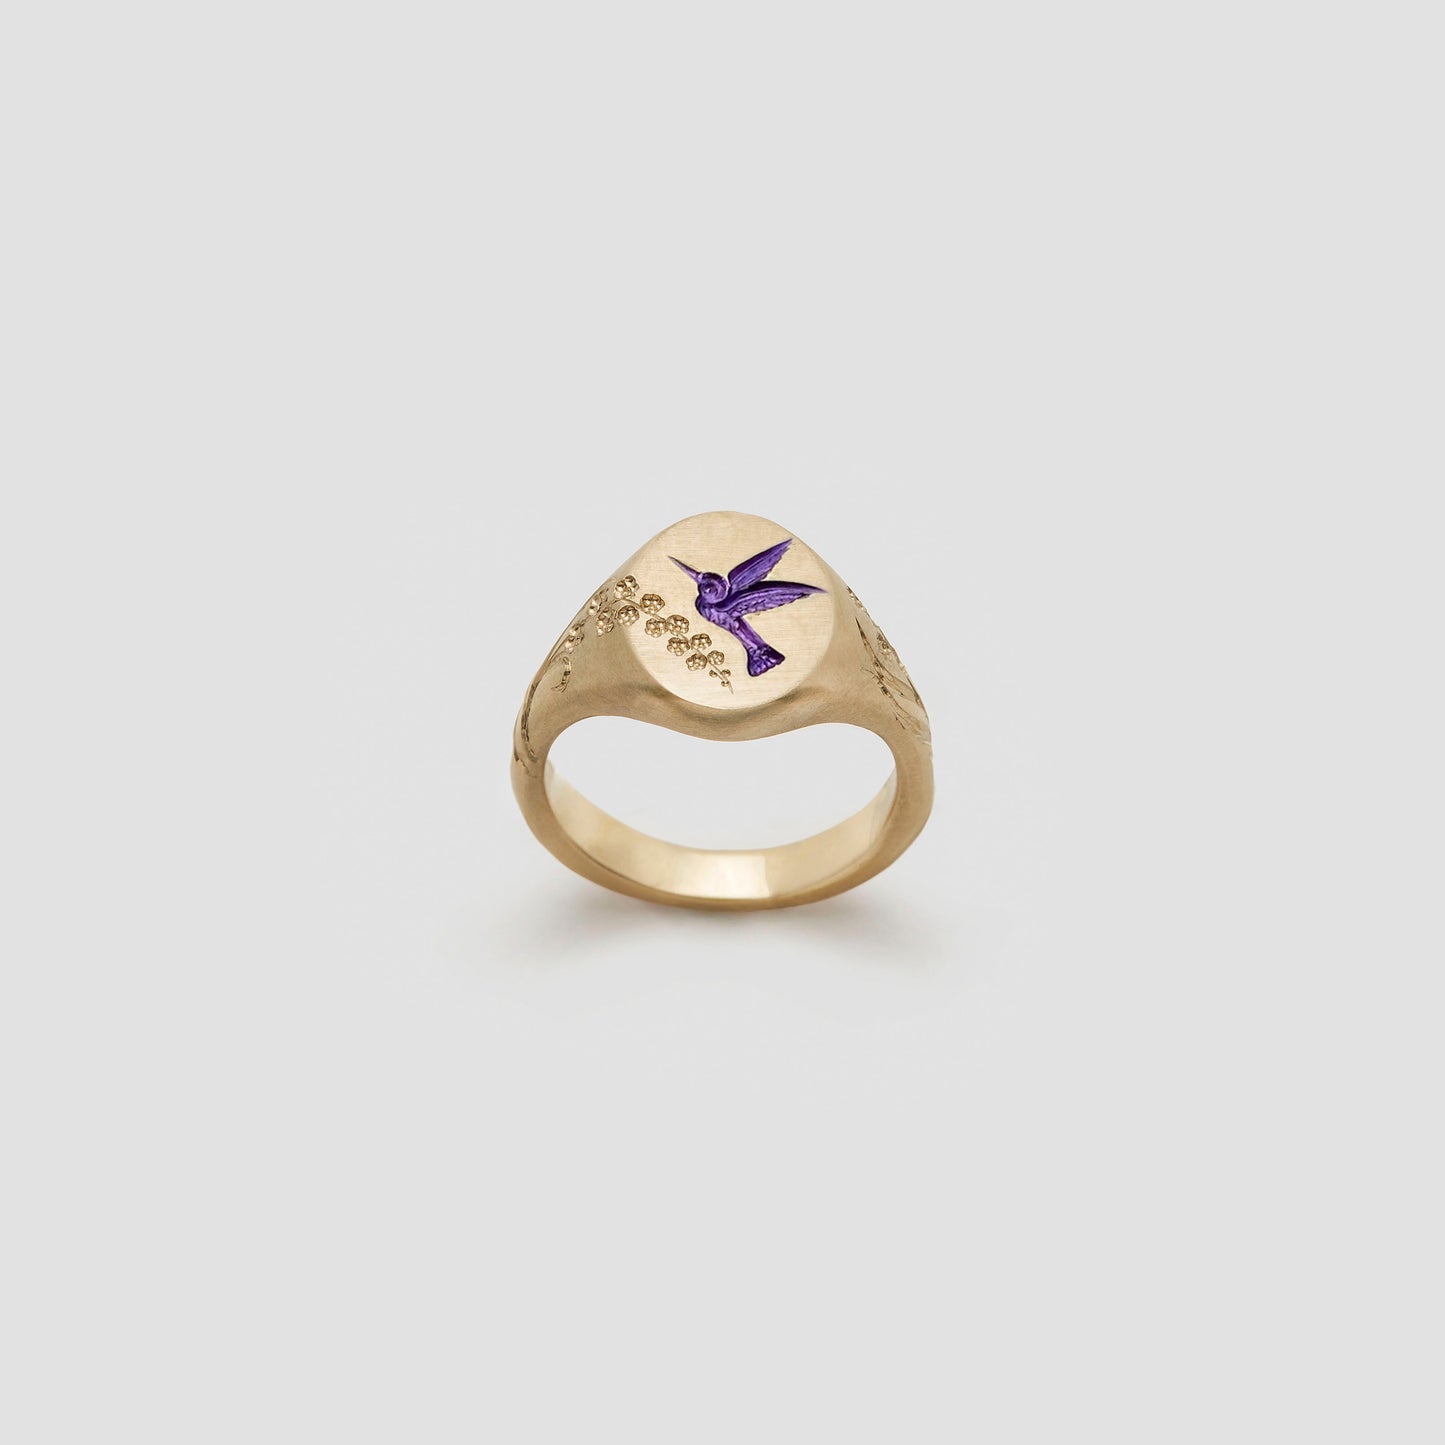 Castro Smith Jewelry Gold Hummingbird Signet Ring with Purple Engravings.